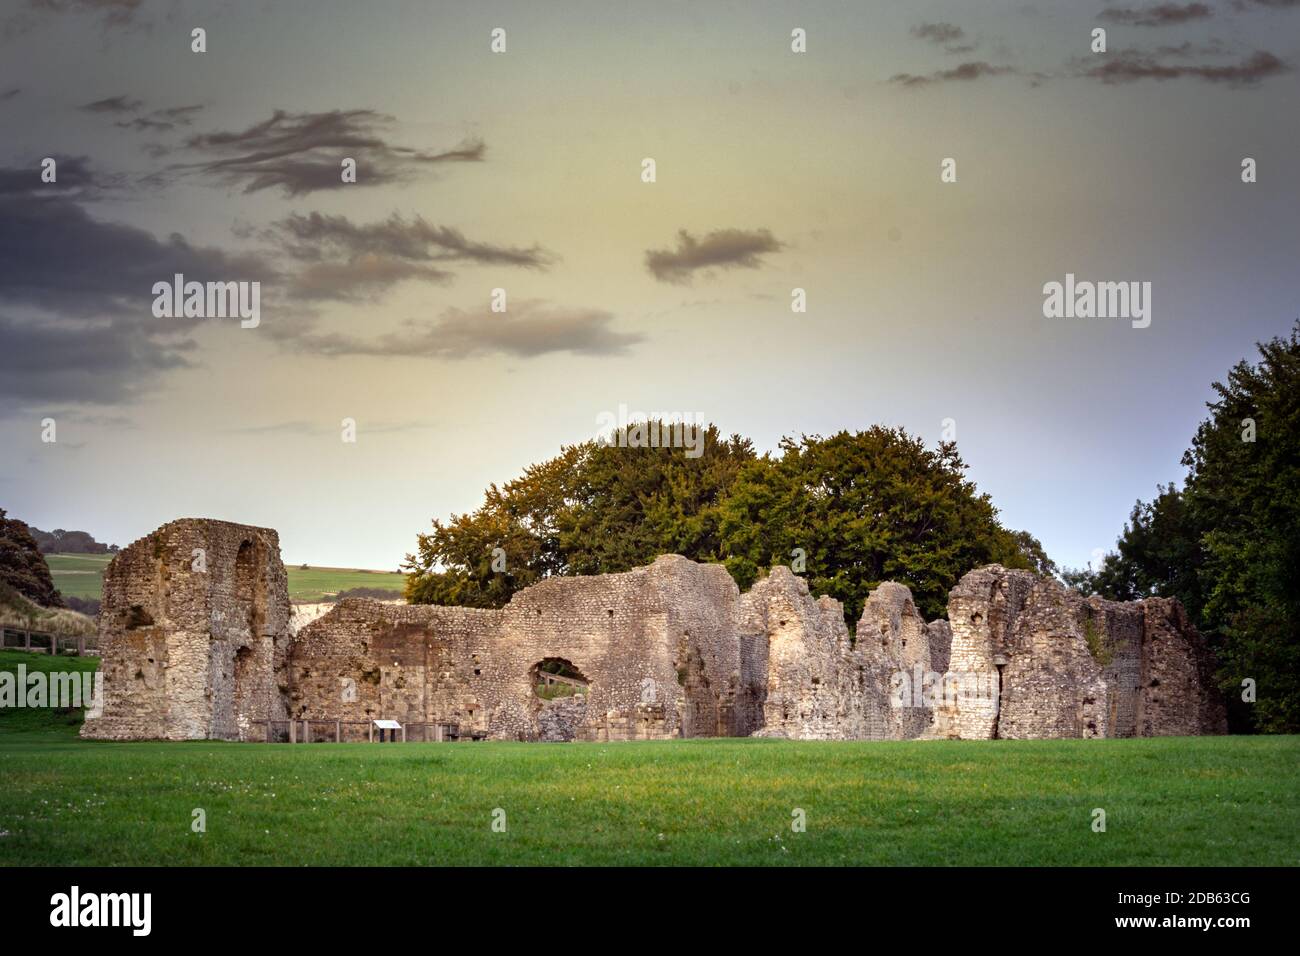 LEWES, ENGLAND - AUGUST 19, 2019: Ruins of Lewes priory, the first Cluniac foundation in England, which was demolished by thomas Cromwell Stock Photo